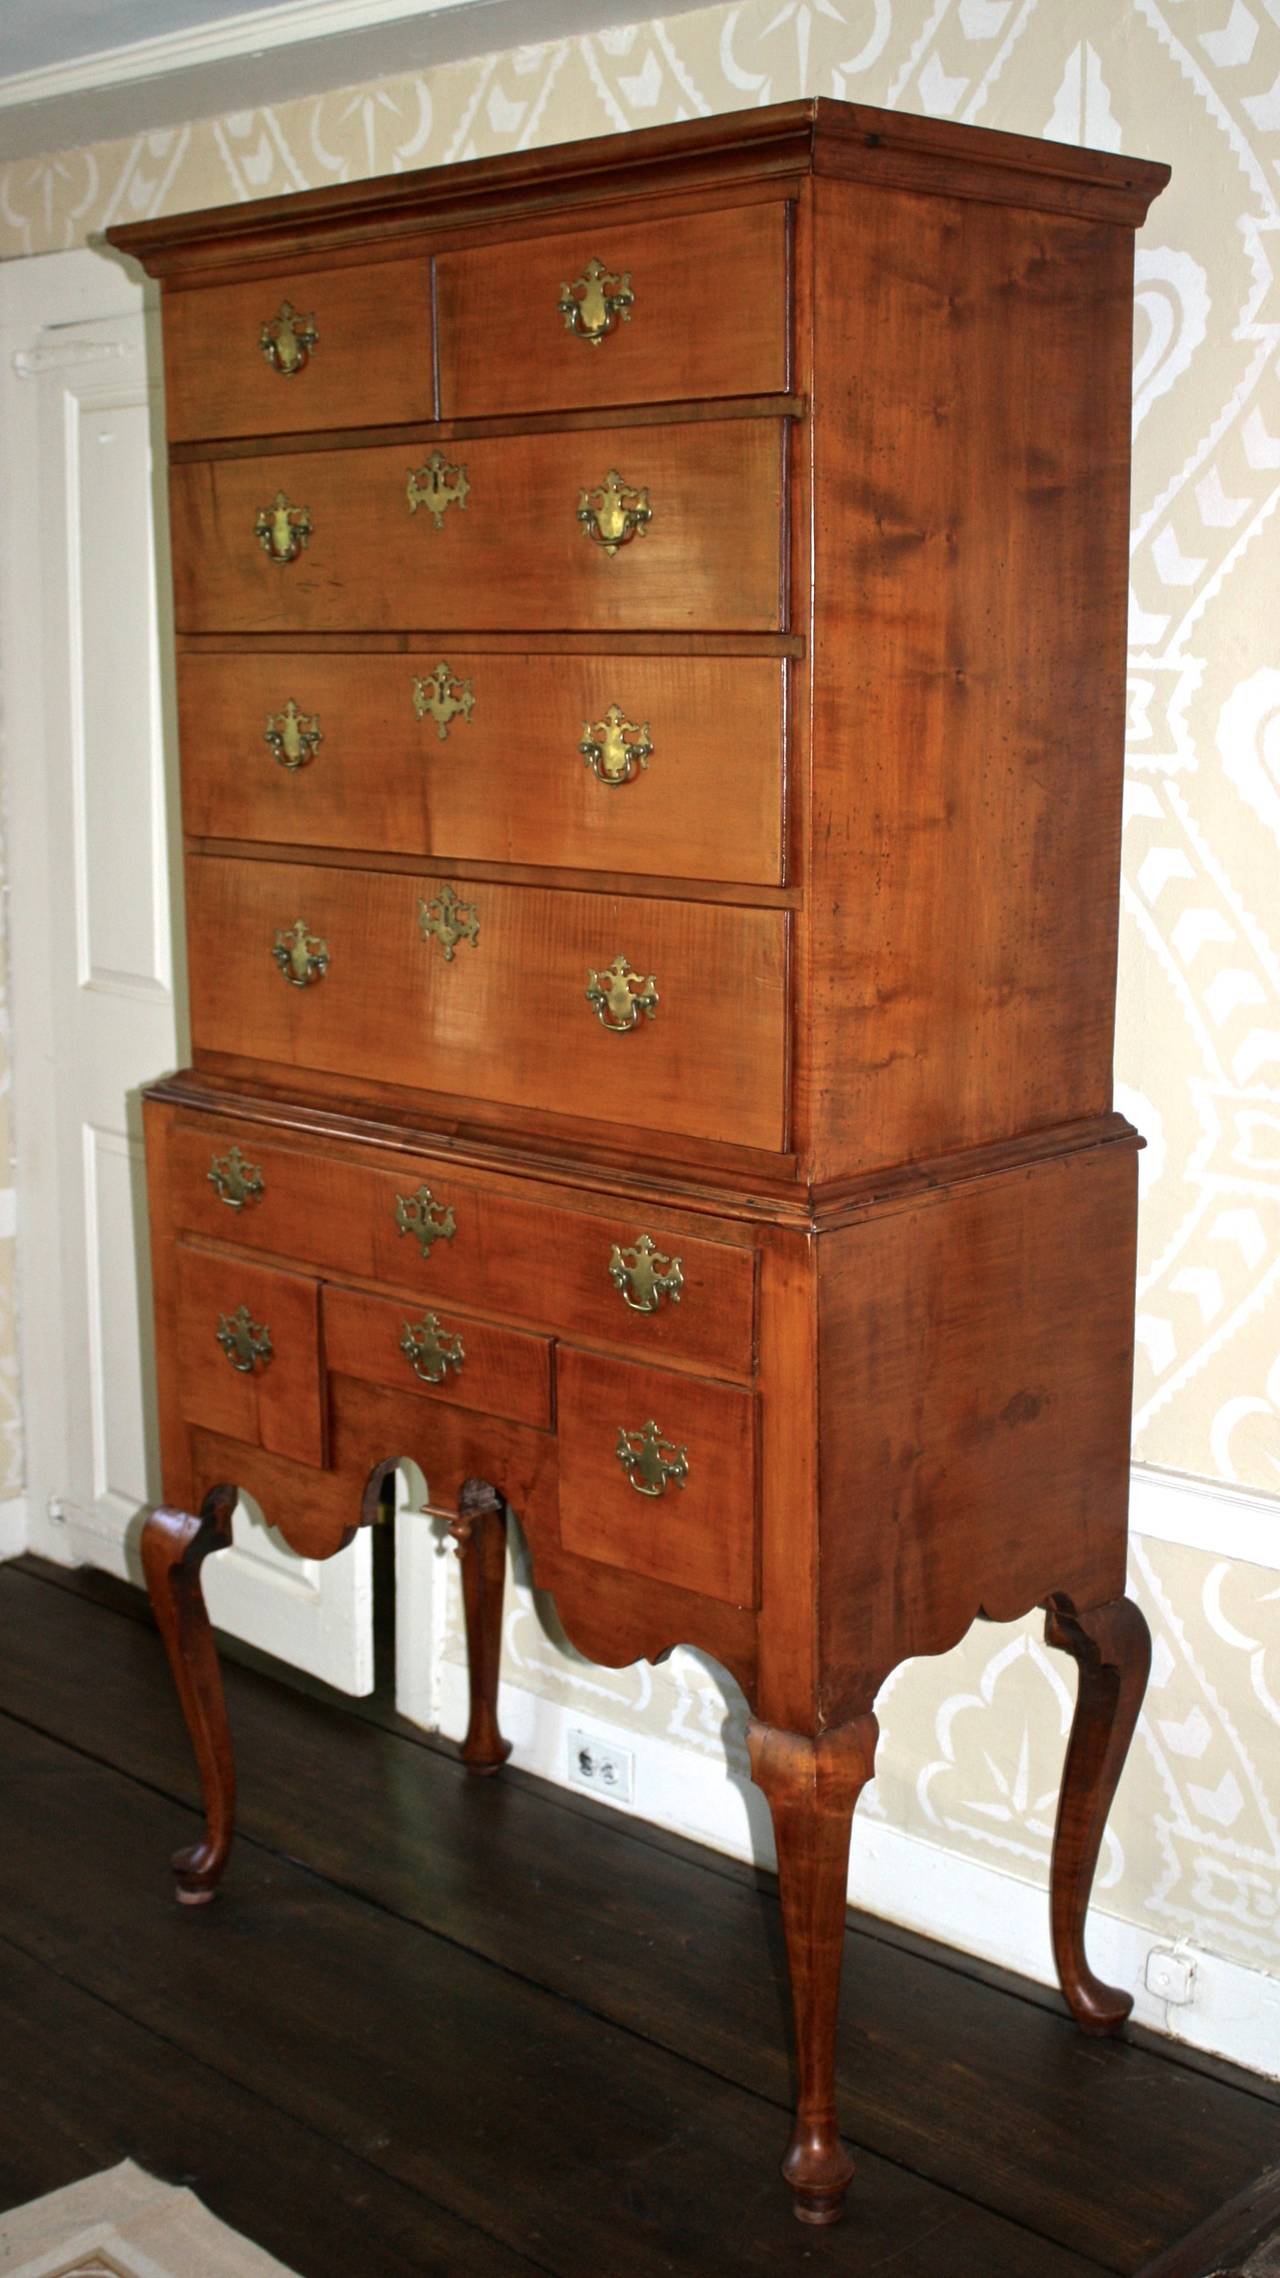 An earliest Townsend Shop flat-topped high chest or 'highboy', of subtle tiger and figured maple; with an upper case of five drawers and a lower case of four drawers, raised on Queen Anne pad-footed legs. The lower case drawer configuration,